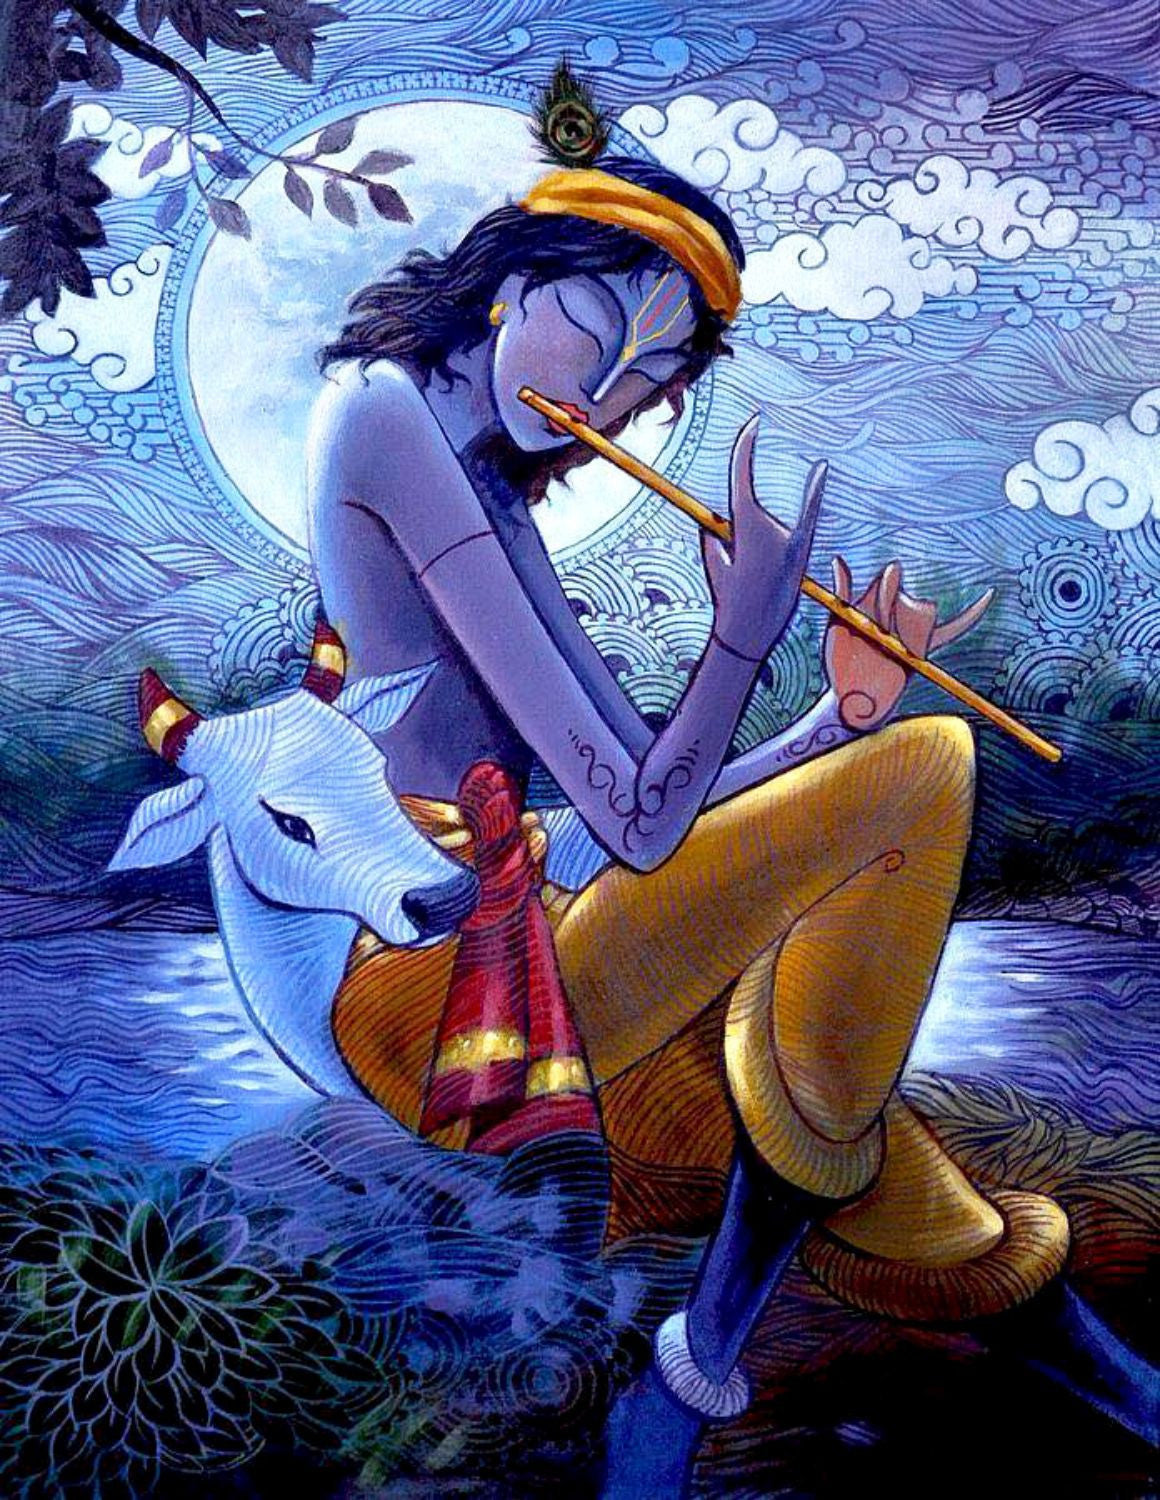 Indian Art - Krishna Painting - Gopala Playing Flute - Posters by ...